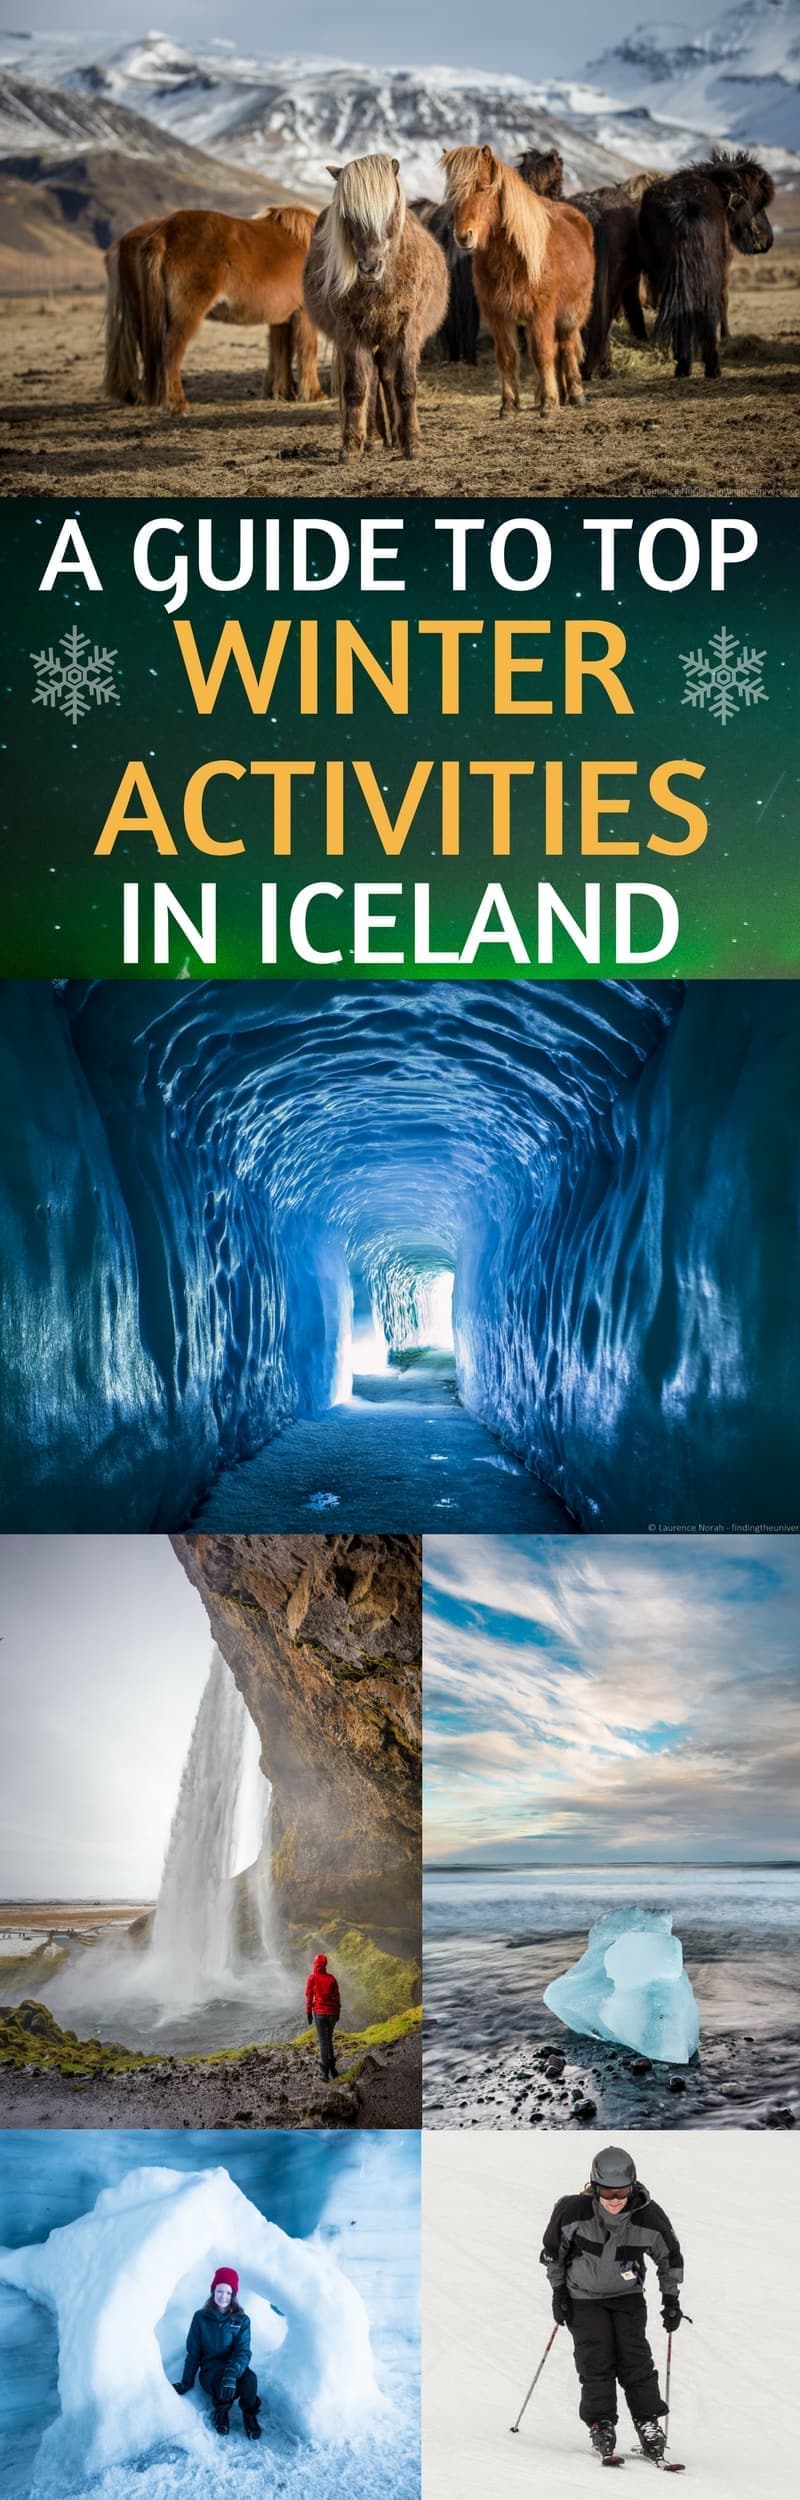 A guide to 18 top winter activities in Iceland! Traveling to Iceland in winter can be a fantastic experience as there are fewer crowds and beautiful winter landscapes. You also have the chance to see the Northern Lights, go skiing, dogsledding, ice skating, snowmobiling, exploring ice caves, and so much more! #IcelandinWinter #Icelandtravel #Iceland #wintertravel 